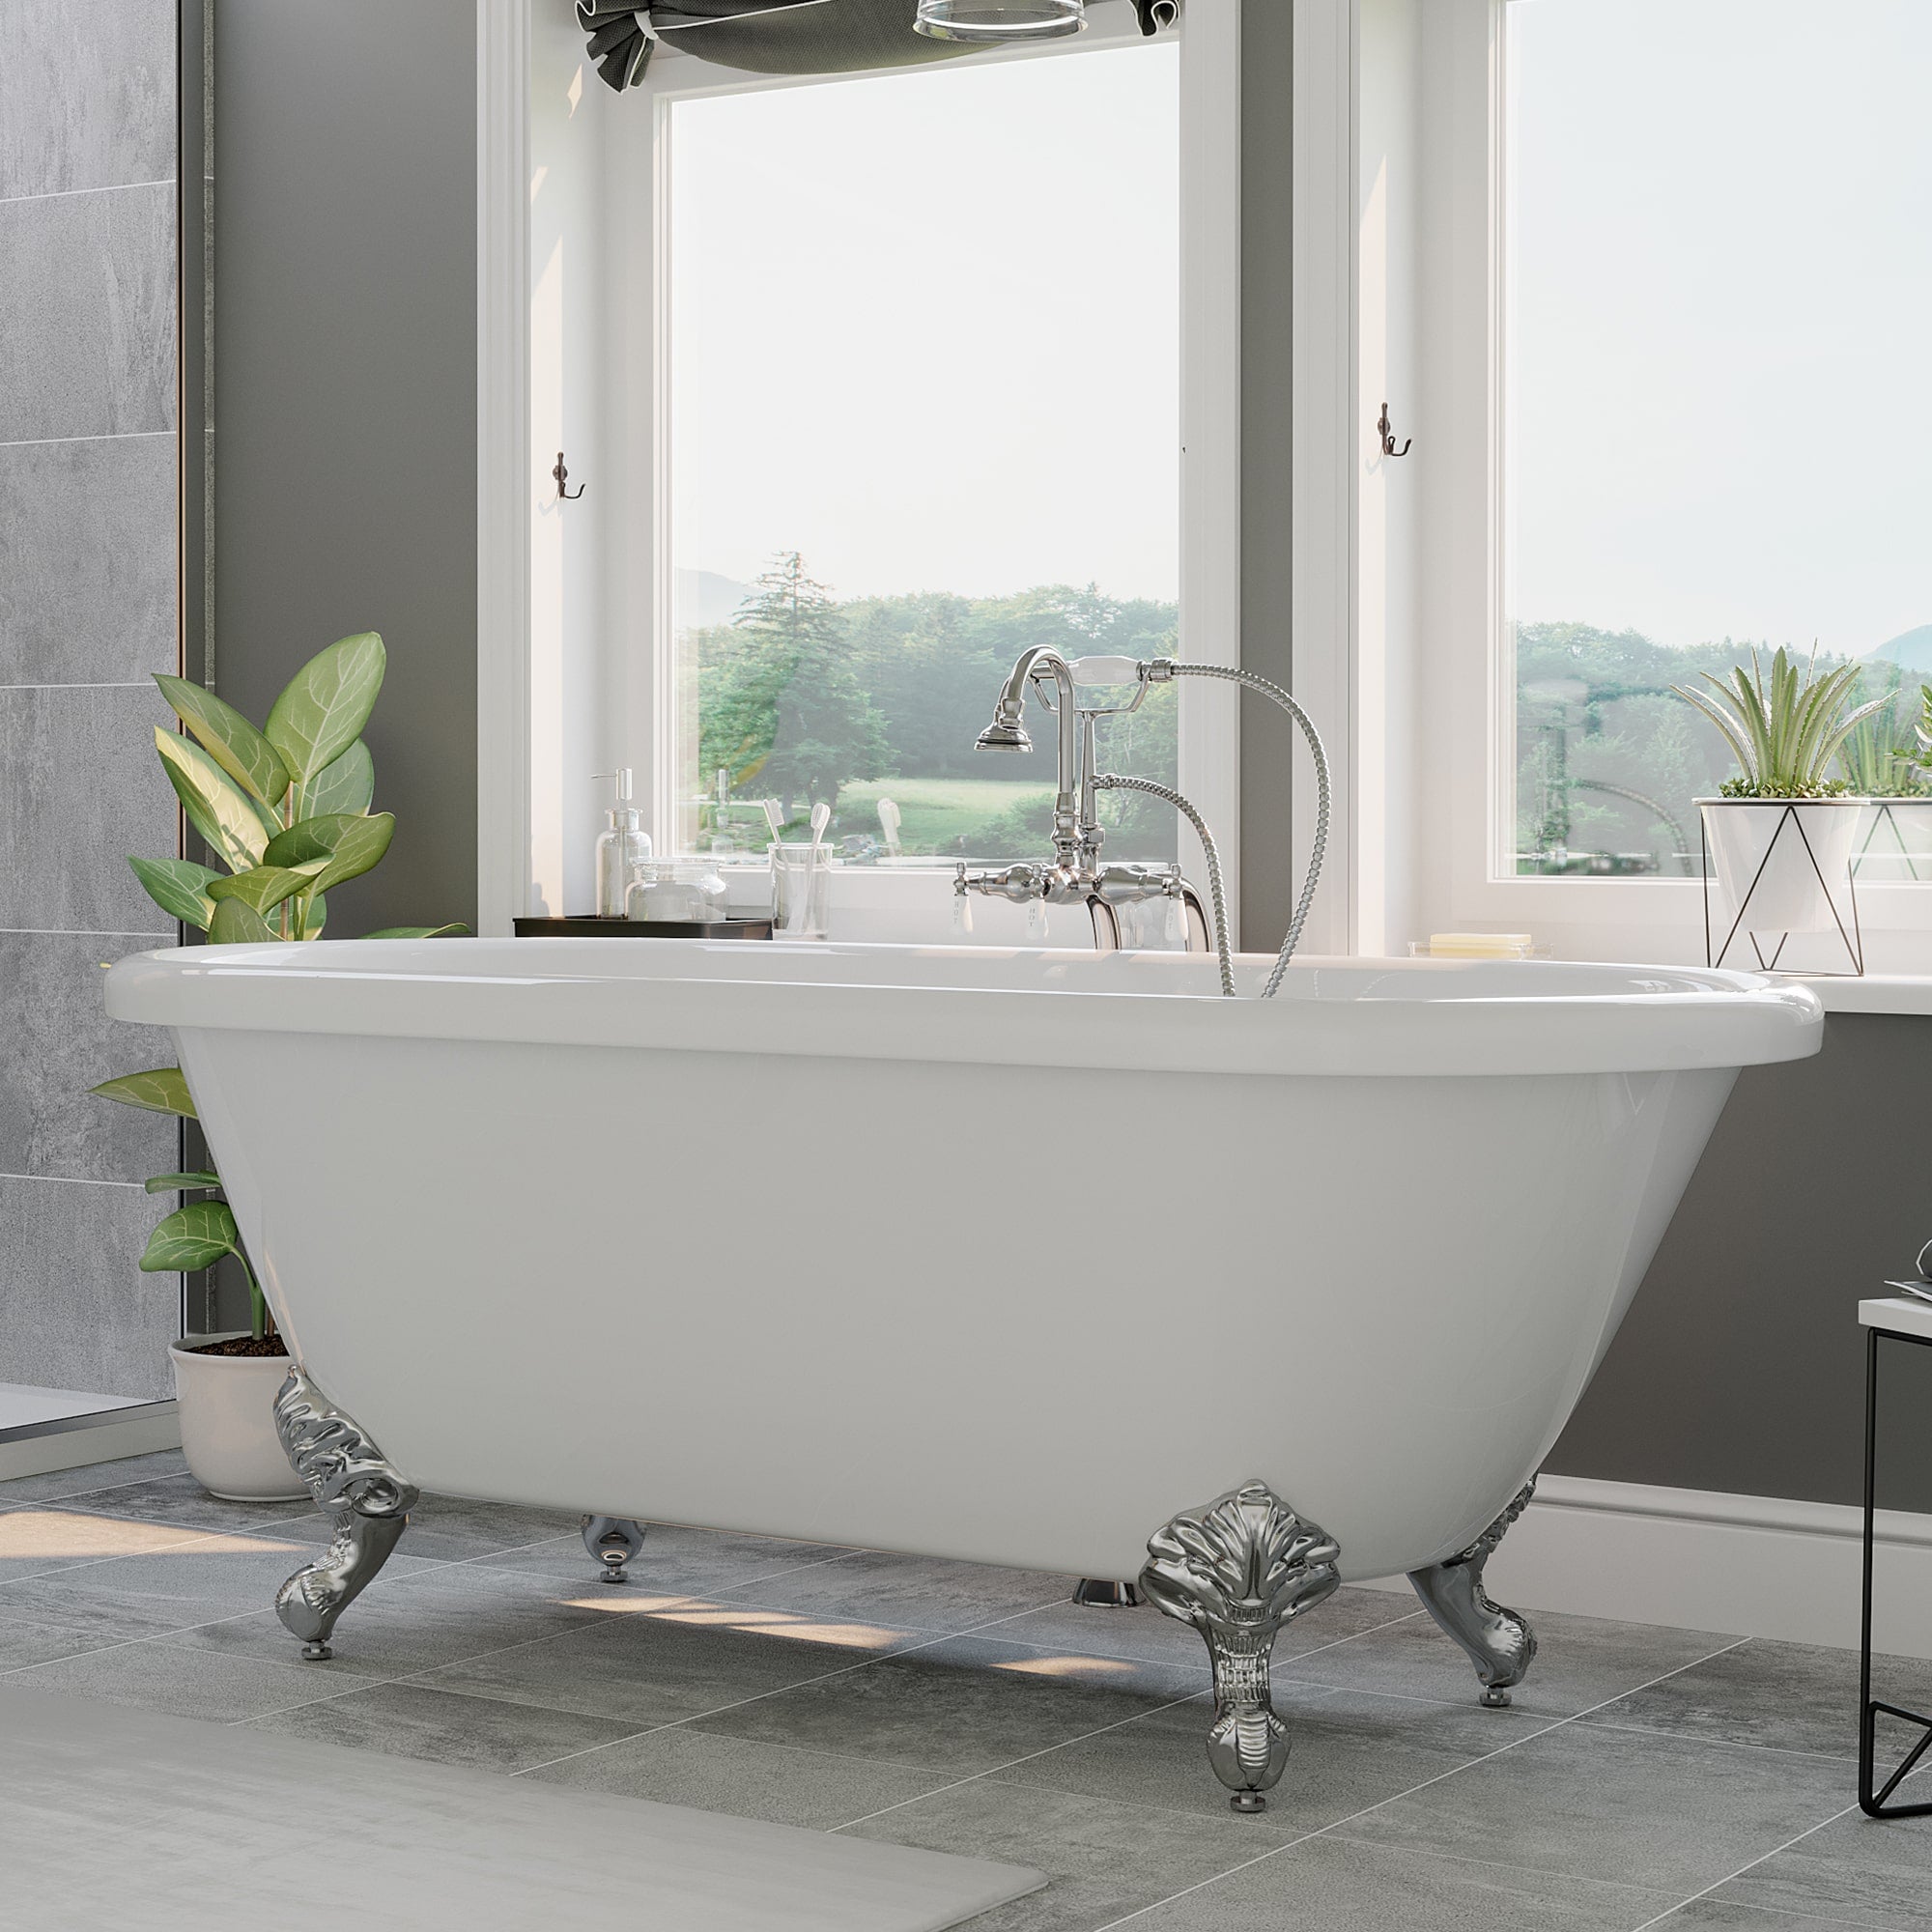 Cambridge Plumbing Double Ended Acrylic Clawfoot Bathtub (White Gloss Finish) With Continuous Rim and Complete Plumbing Package -Brushed nickel ball and claw feet - ADE60-398684-PKG-NH - Vital Hydrotherapy